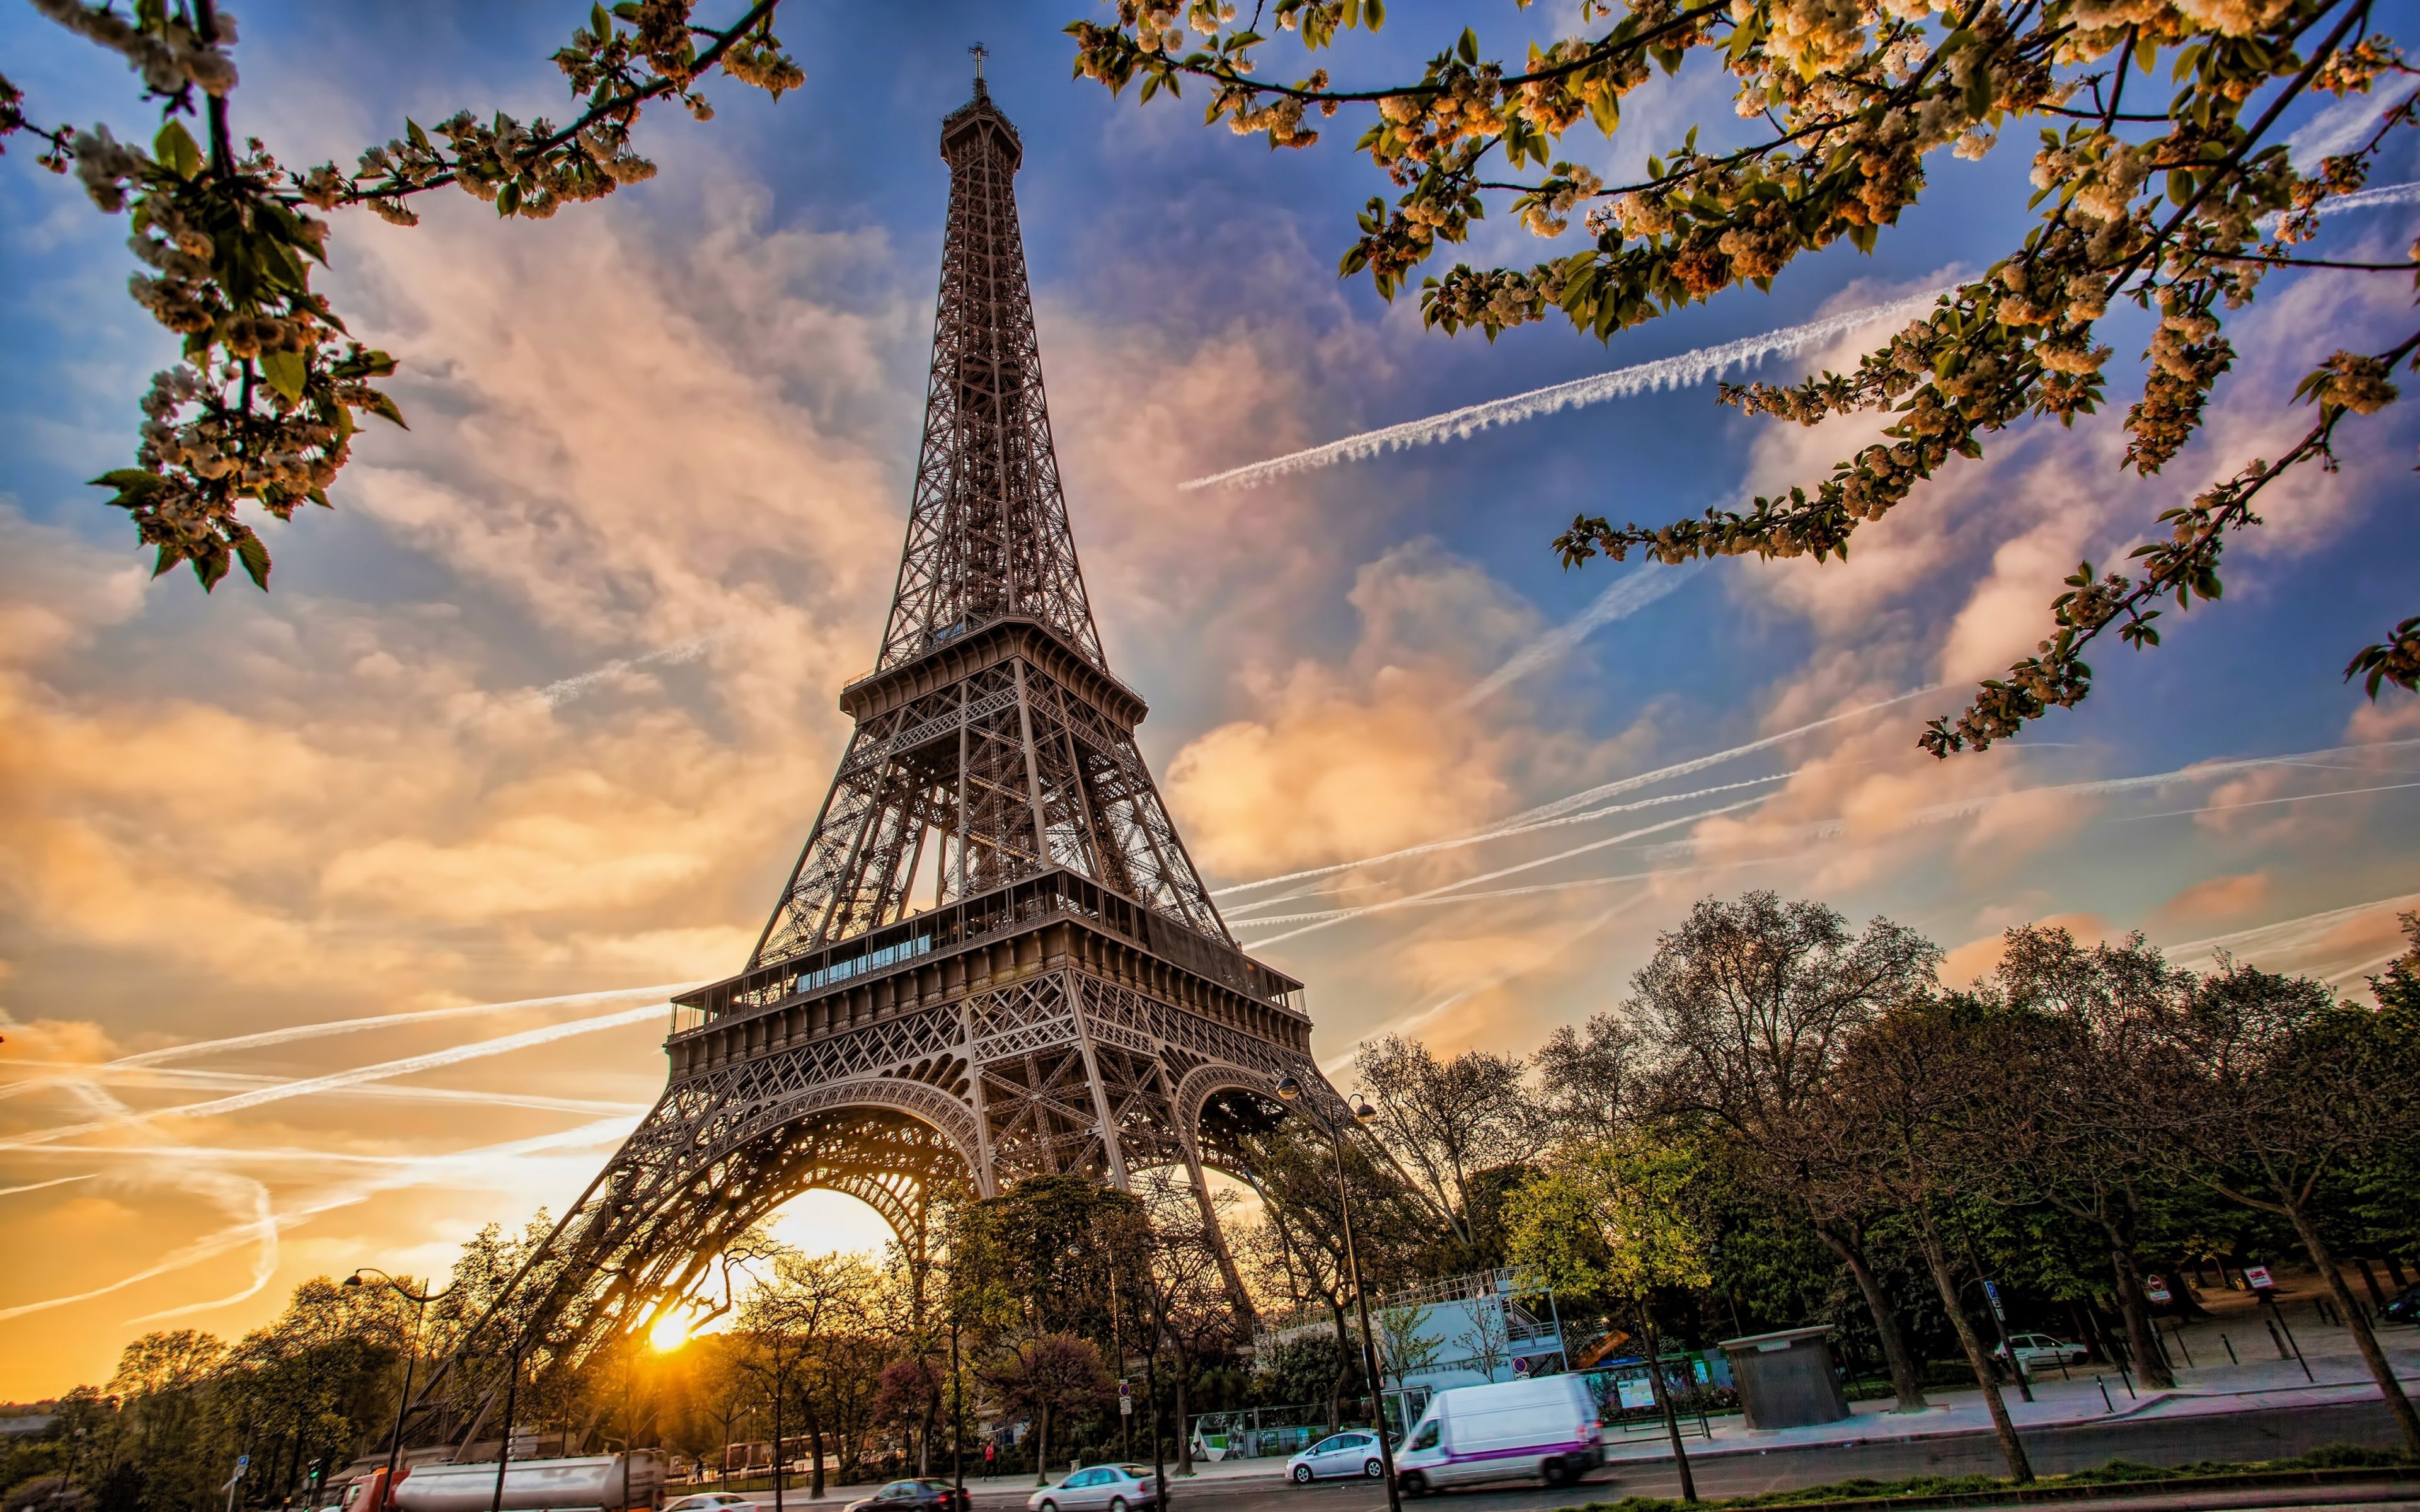 Download 3840x2400 wallpaper eiffel tower, architecture, paris, monument, 4k, ultra HD 16: widescreen, 3840x2400 HD image, background, 3422